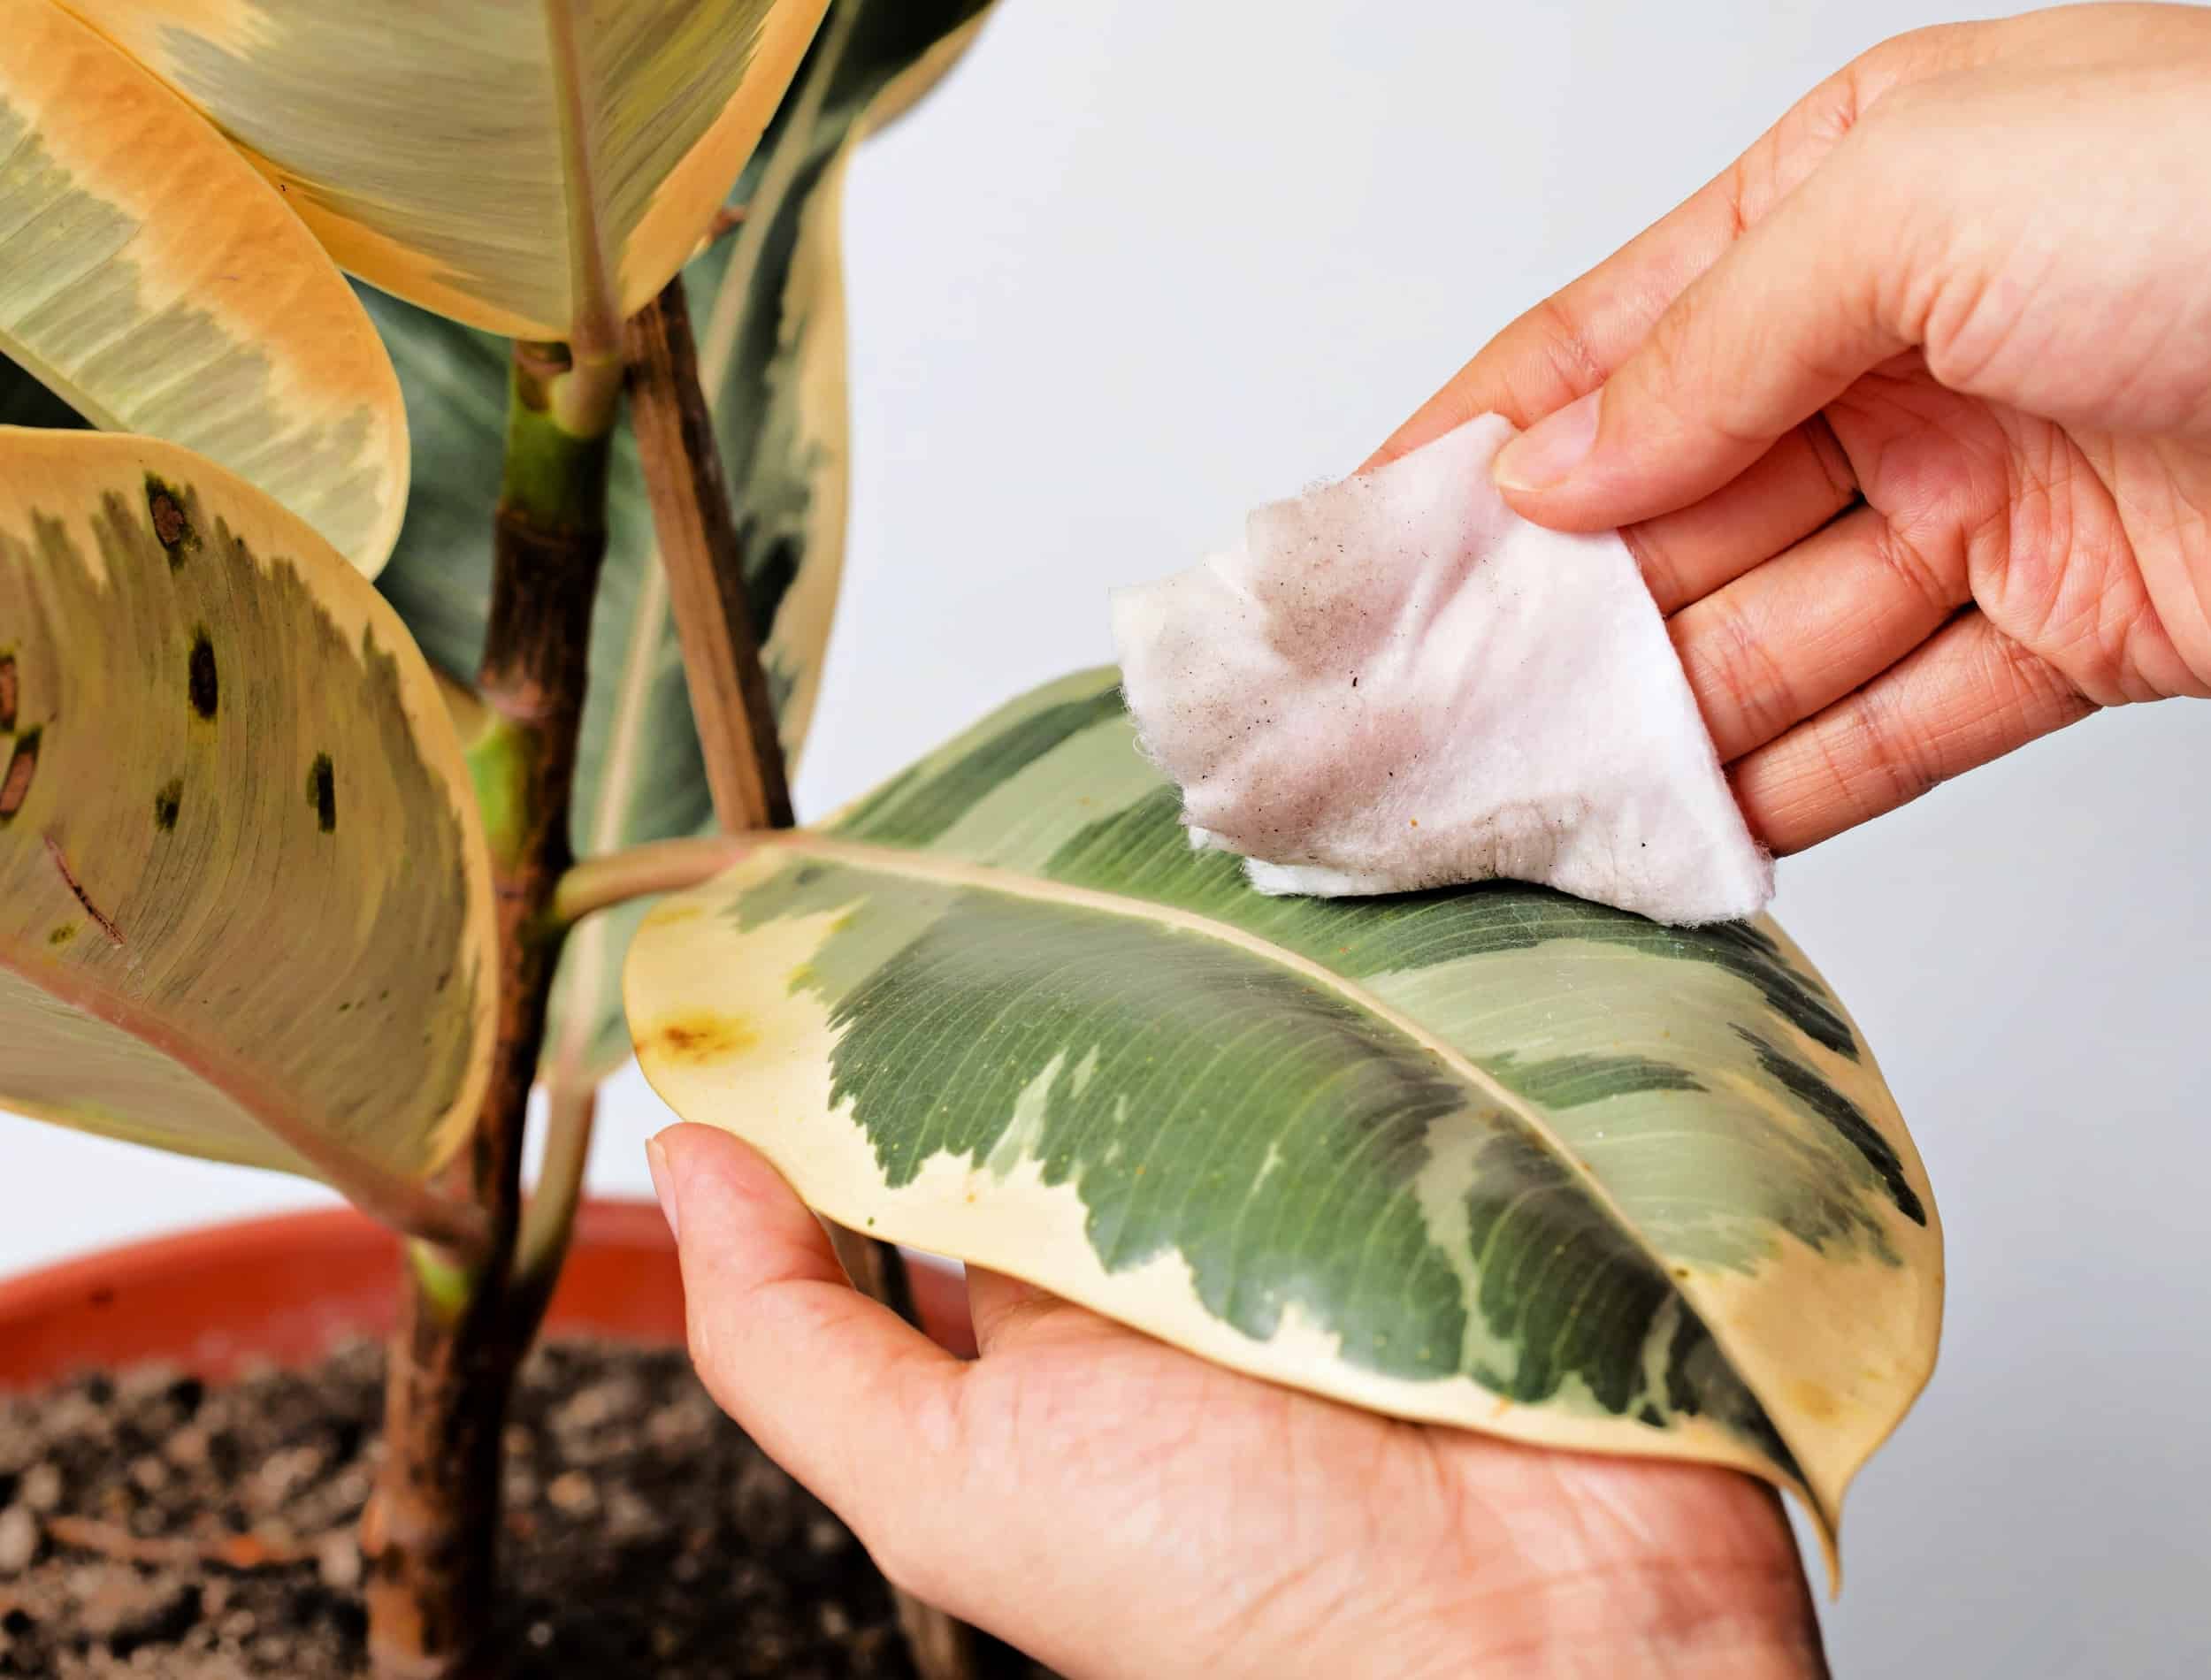 Woman cleaning houseplant, Ficus Elastica Tineke Variegatad or Rubber Plant. Concept of indoor plant care.